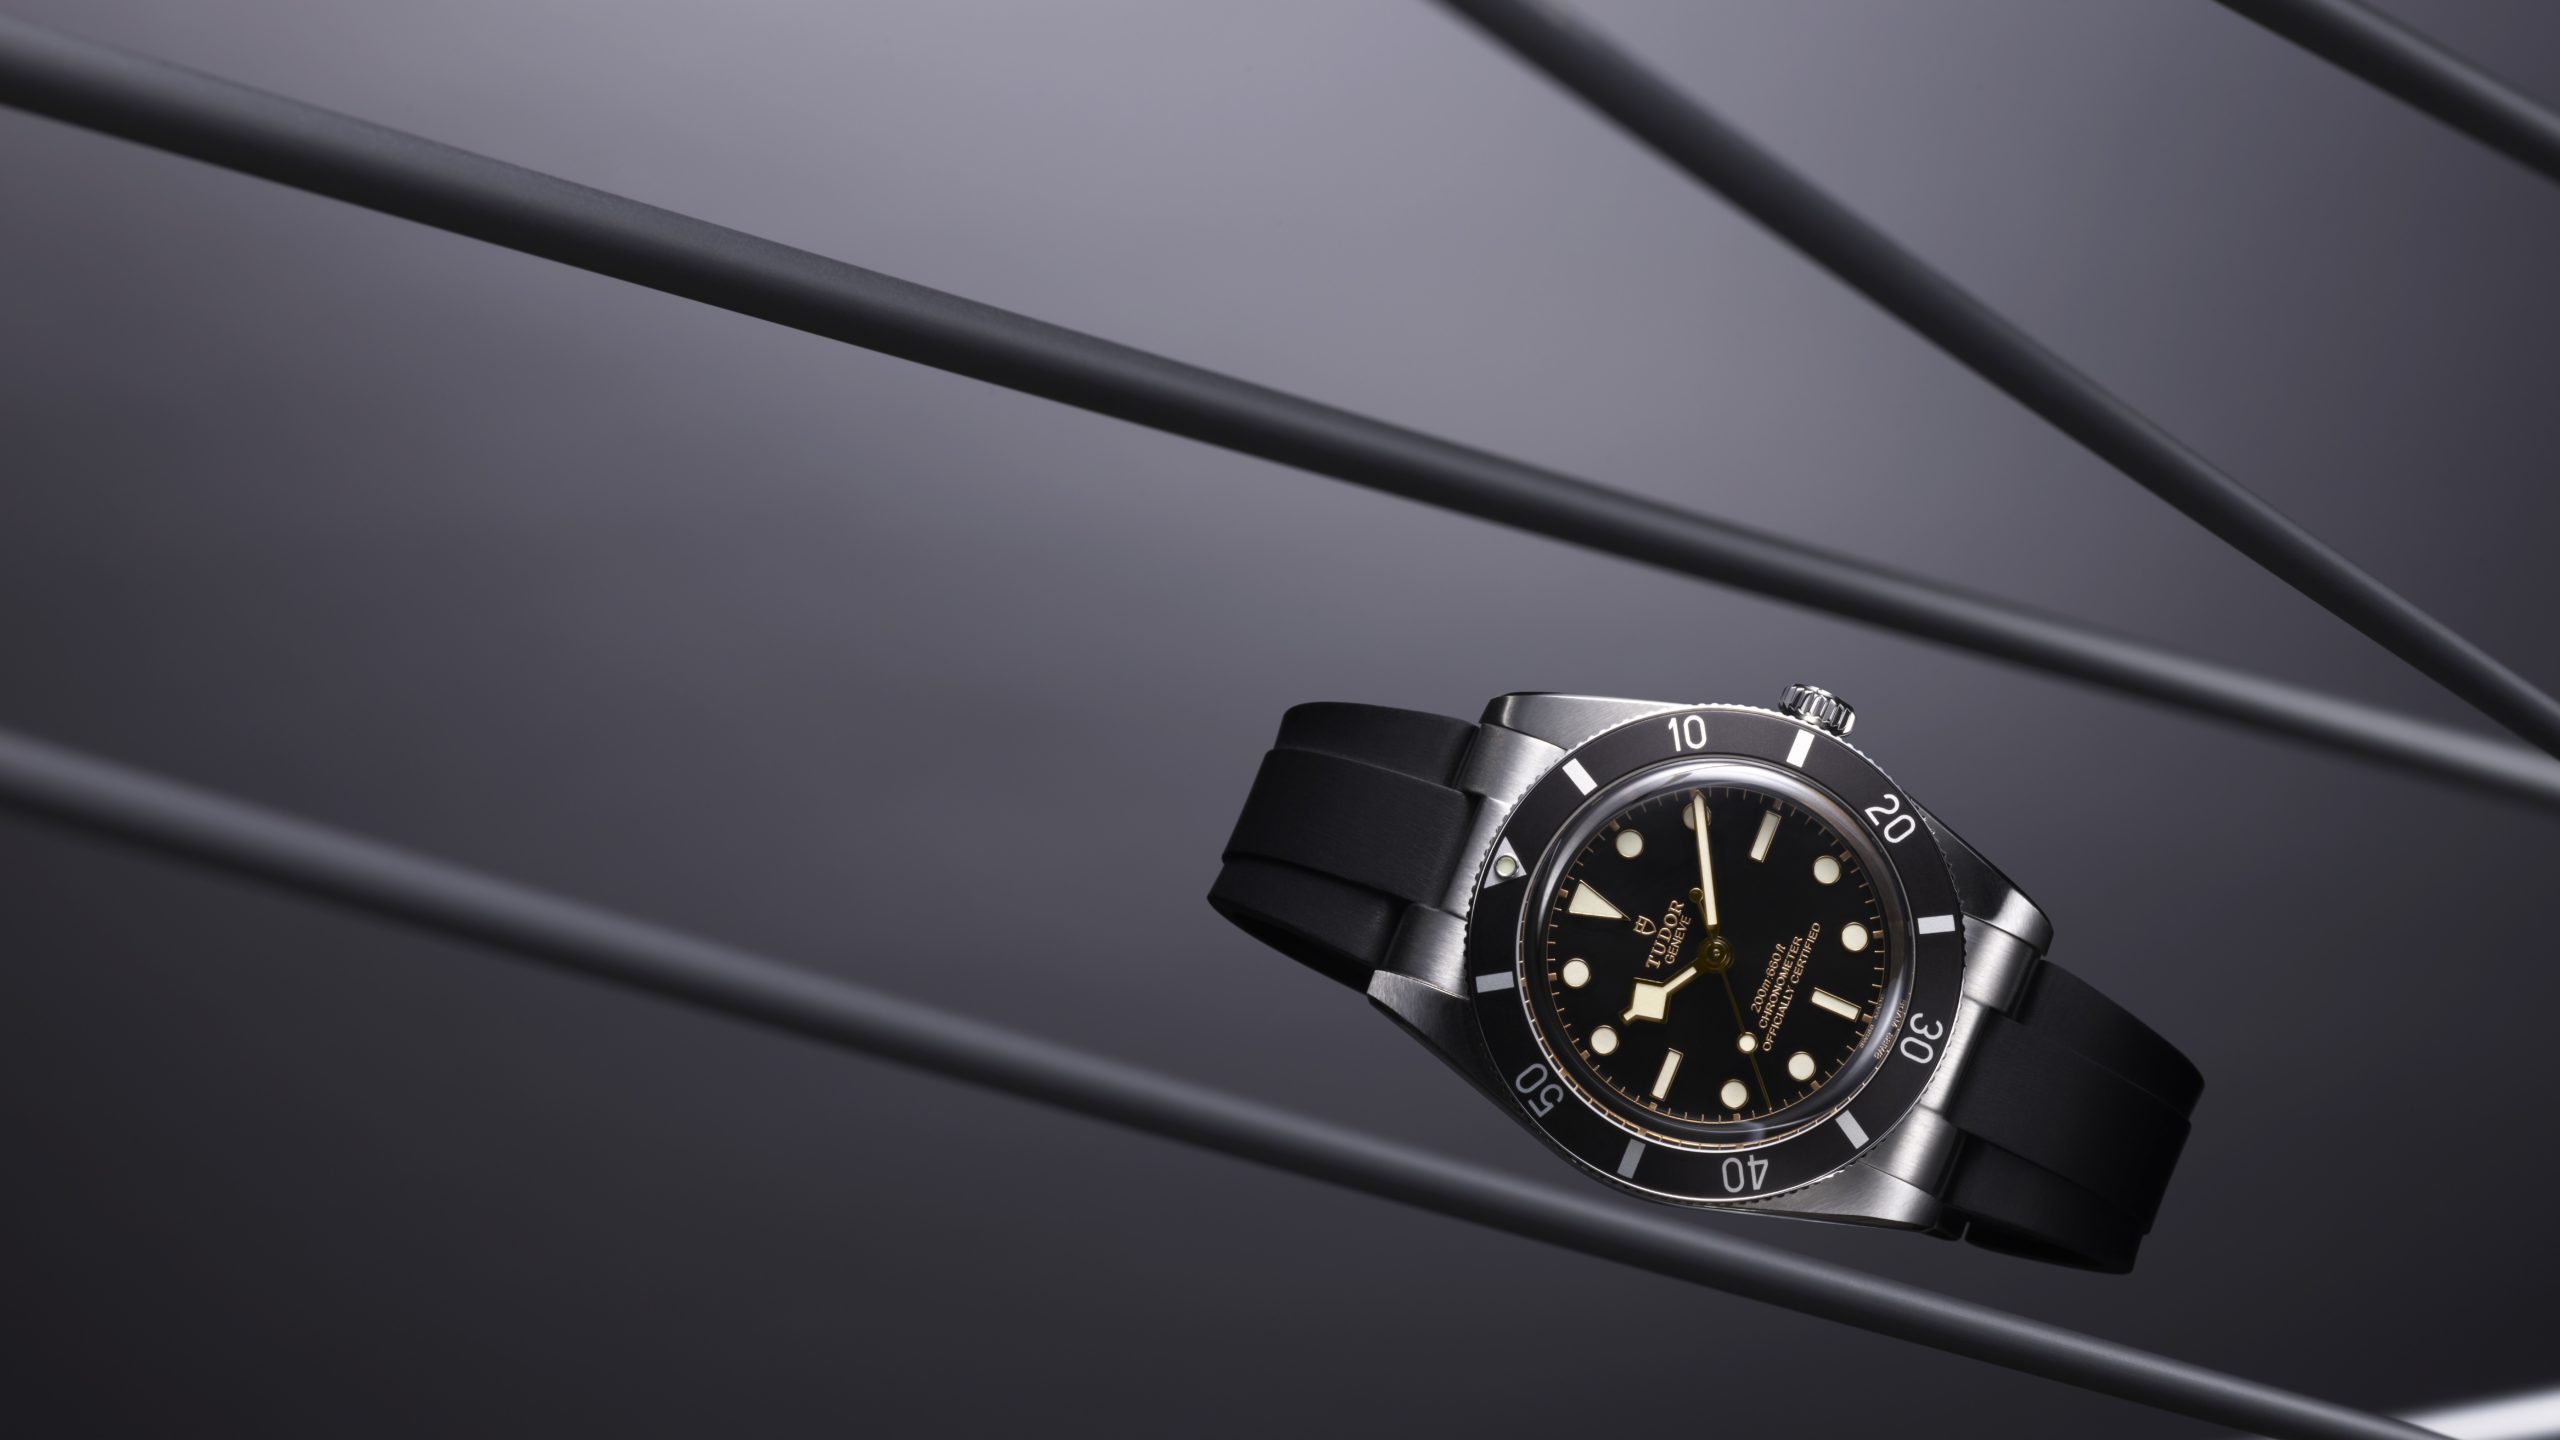 What did Tudor release today at Watches and Wonders?